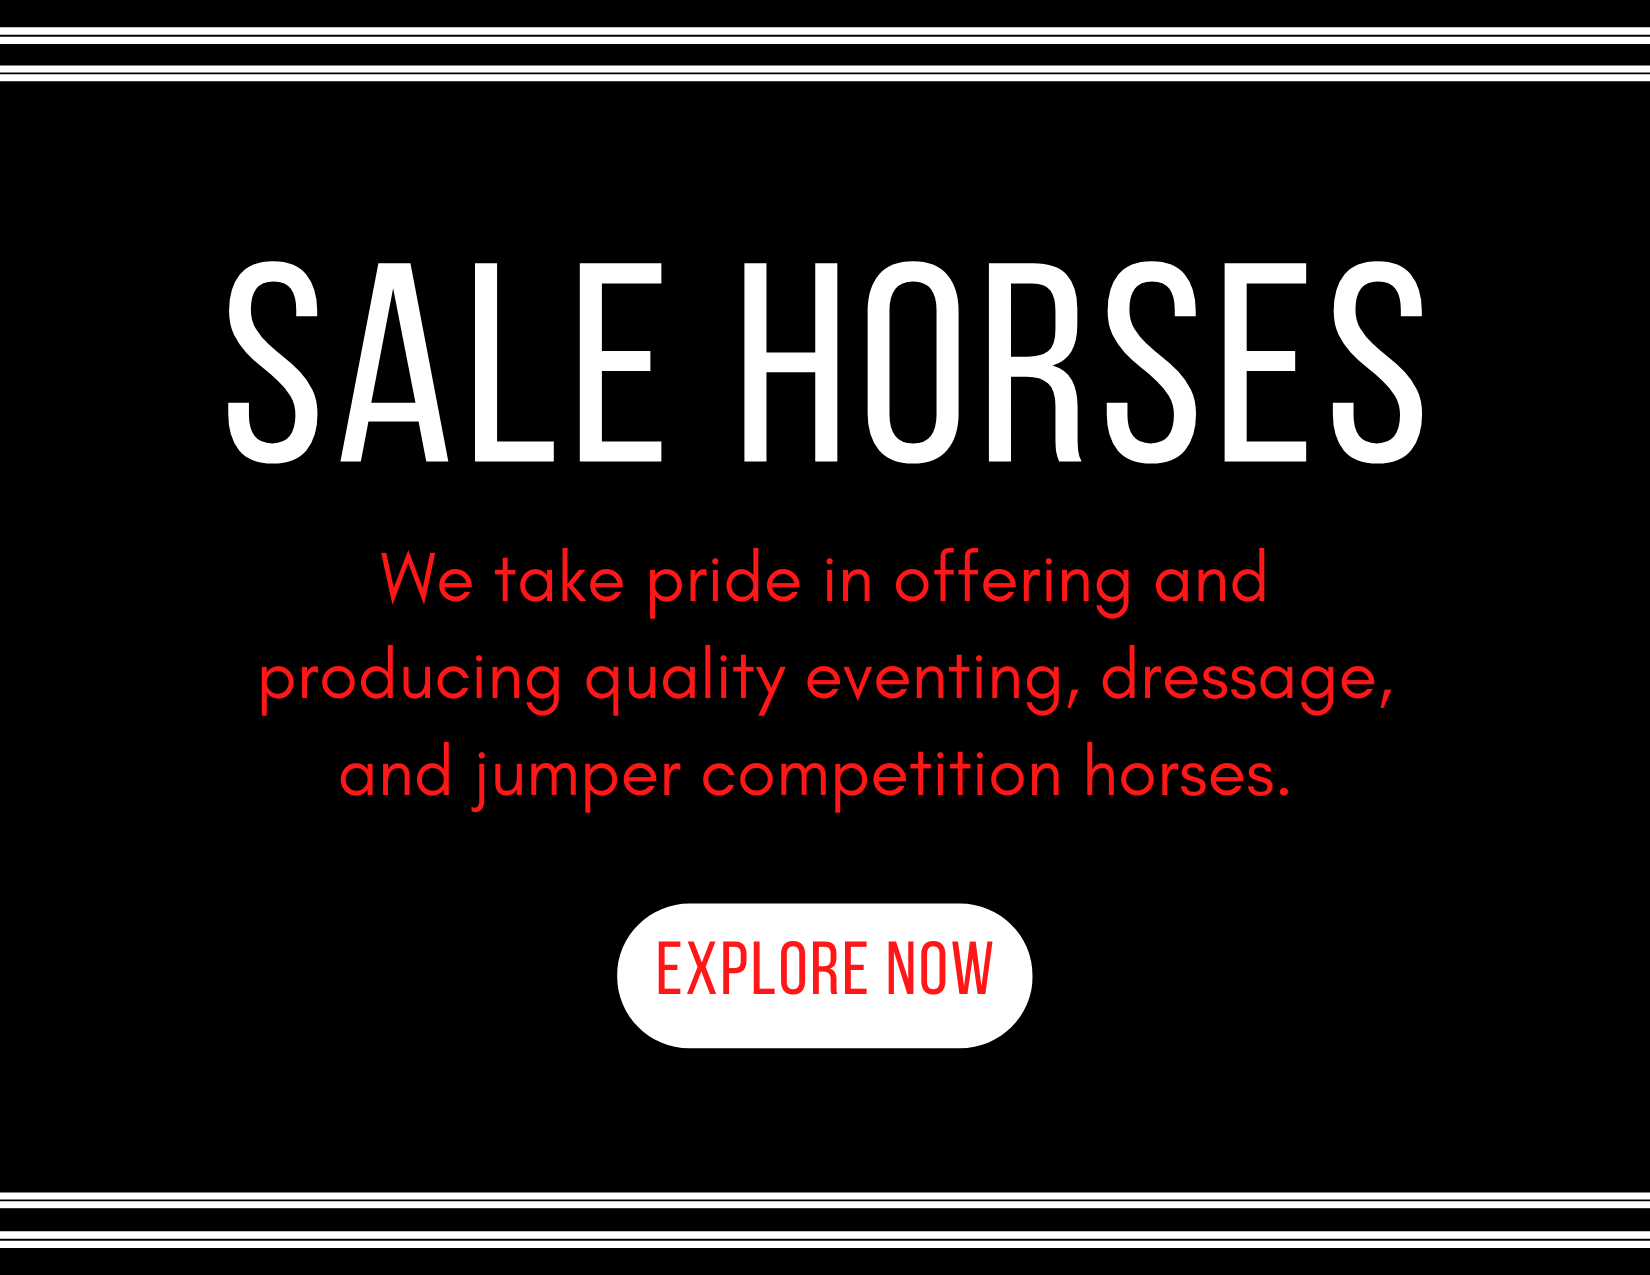 Four Star Farm offers quality eventing, dressage and hunter/jumper competition horses.